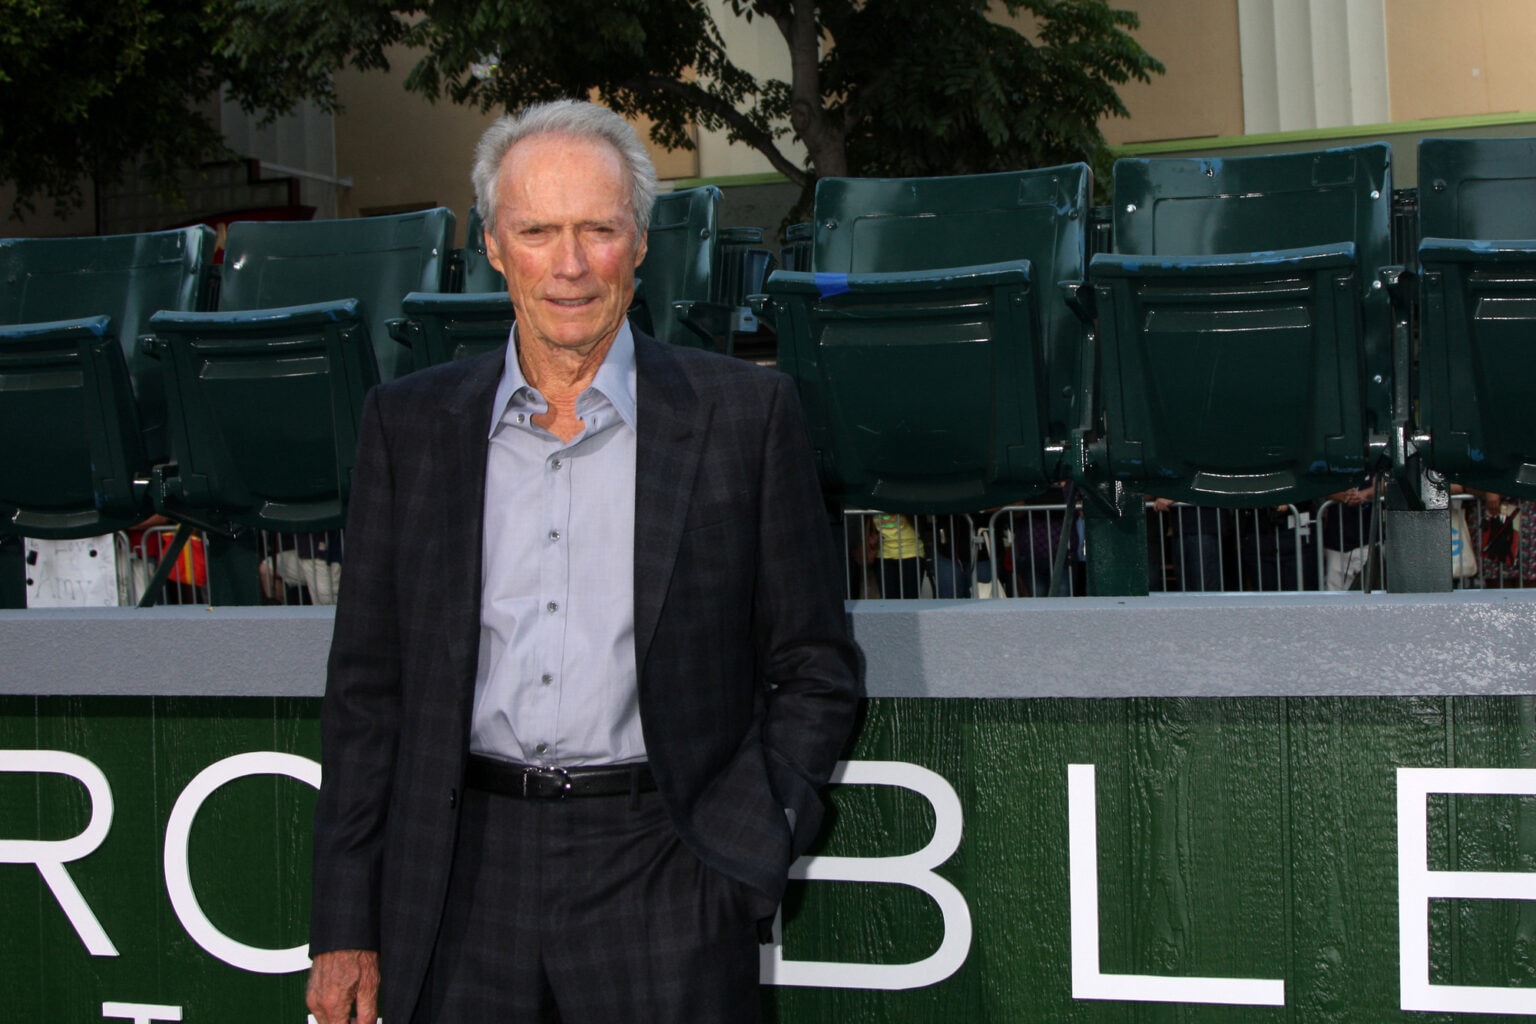 Clint Eastwood's Net Worth and Inspiring Story